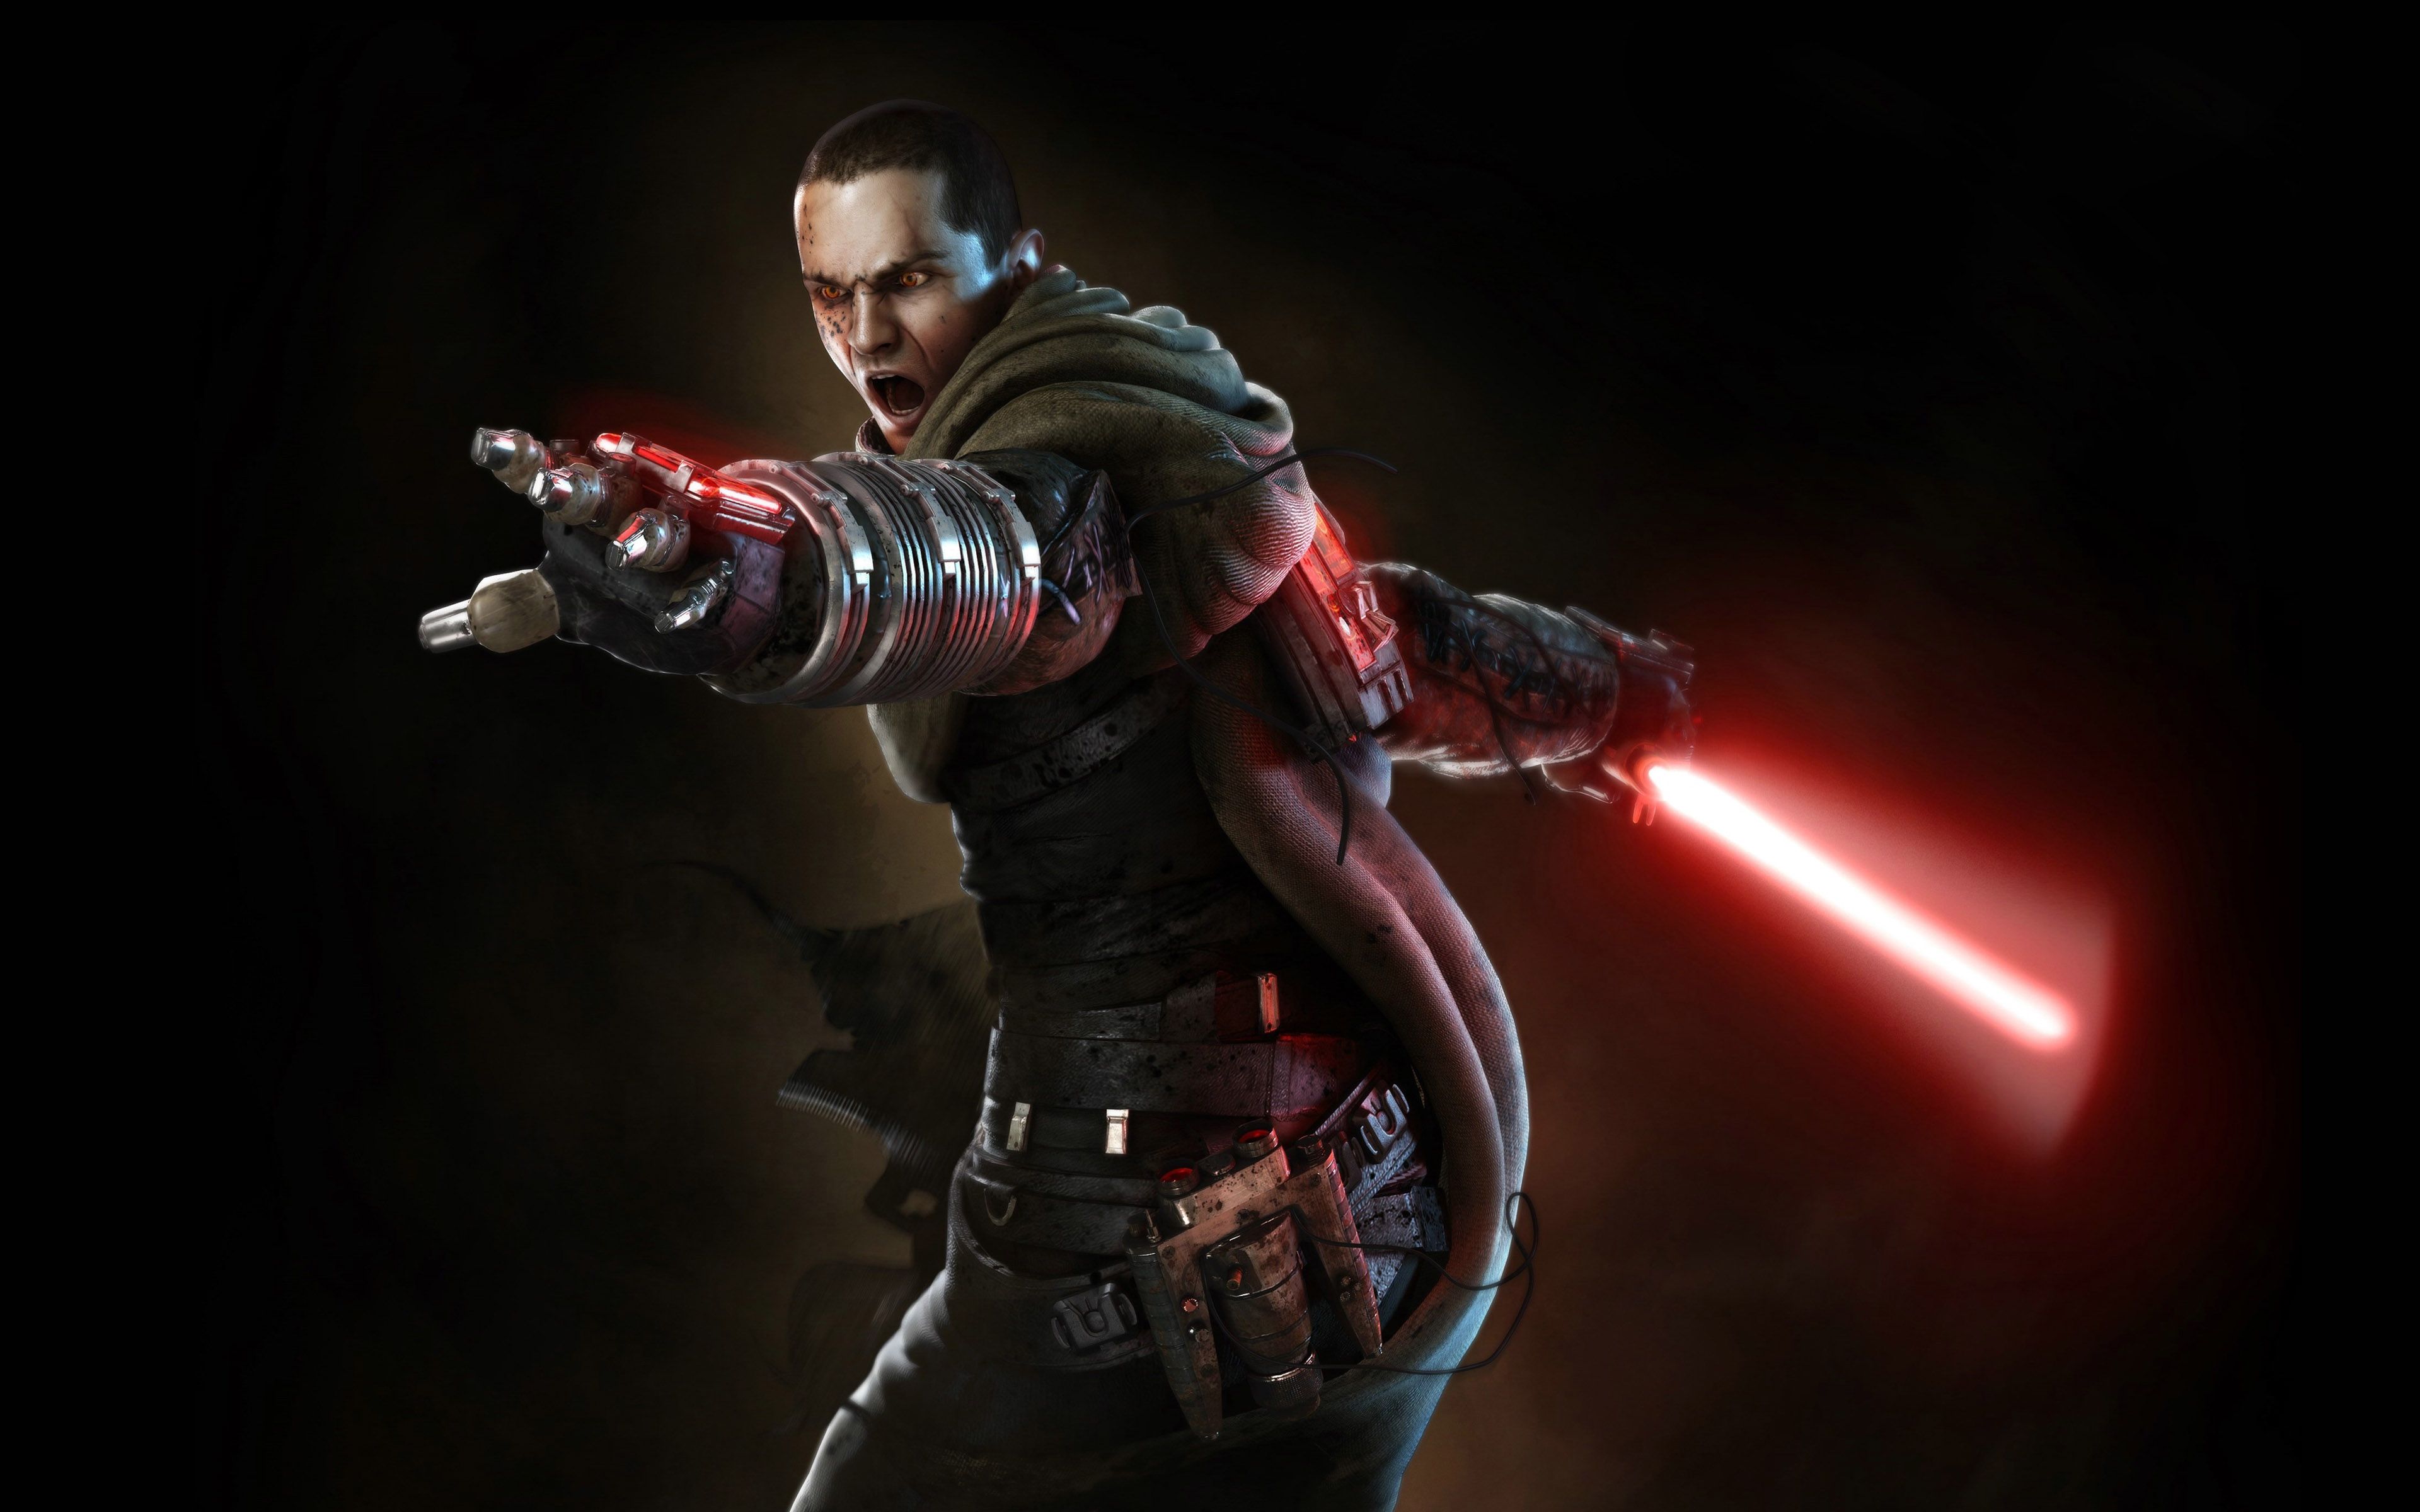 Star Wars The Force Unleashed Video Game HD Wallpaper 3840x2400, Wallpaper13.com